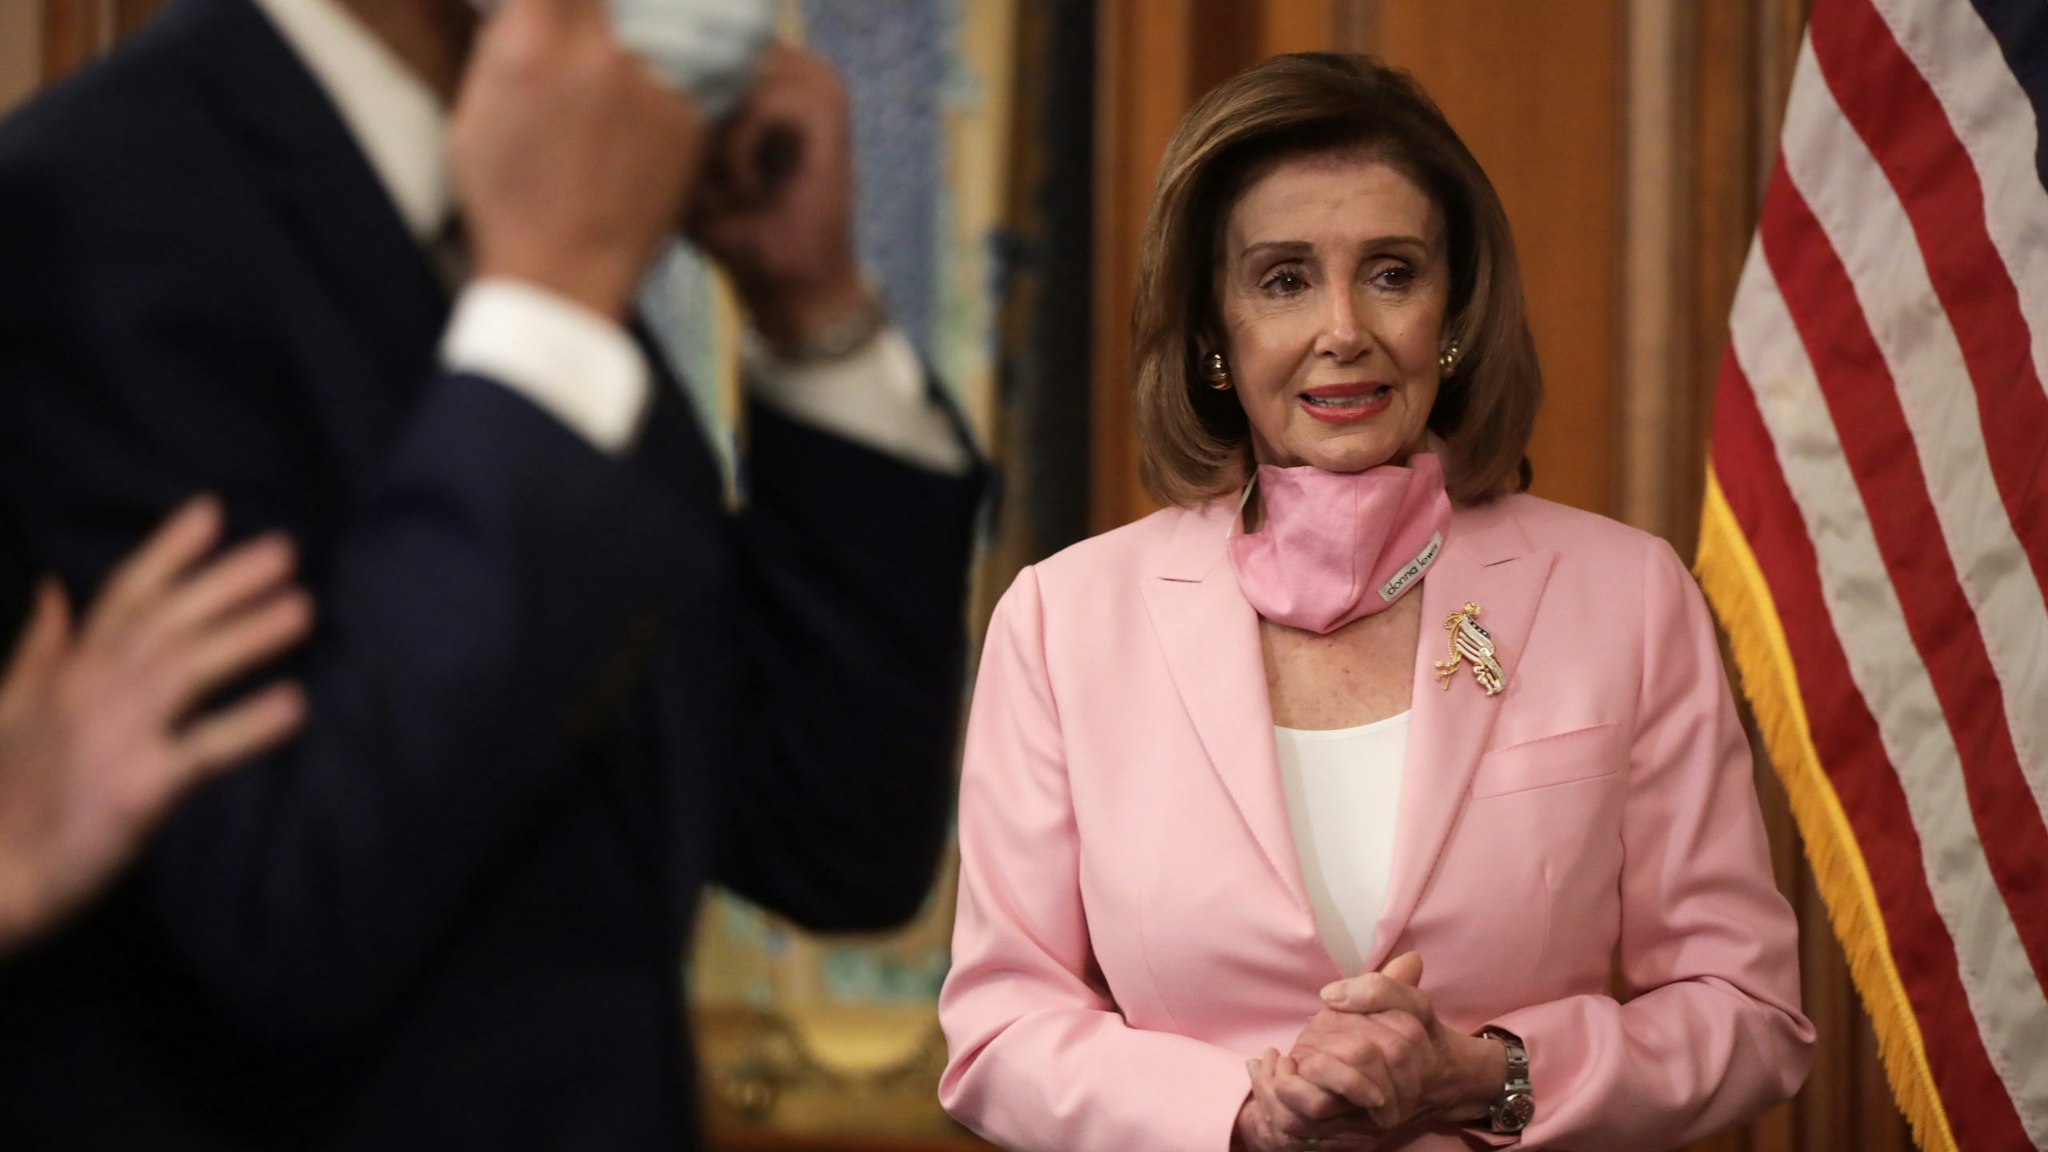 WASHINGTON, DC - MAY 05: U.S. Speaker of the House Rep. Nancy Pelosi (D-CA) is seen during a ceremonial swearing-in at the U.S. Capitol May 5, 2020 in Washington, DC. Rep. Kweisi Mfume (D-MD) will be finishing the term of the late Rep. Elijah Cummings (D-MD) who had passed in October of 2019. (Photo by Alex Wong/Getty Images)